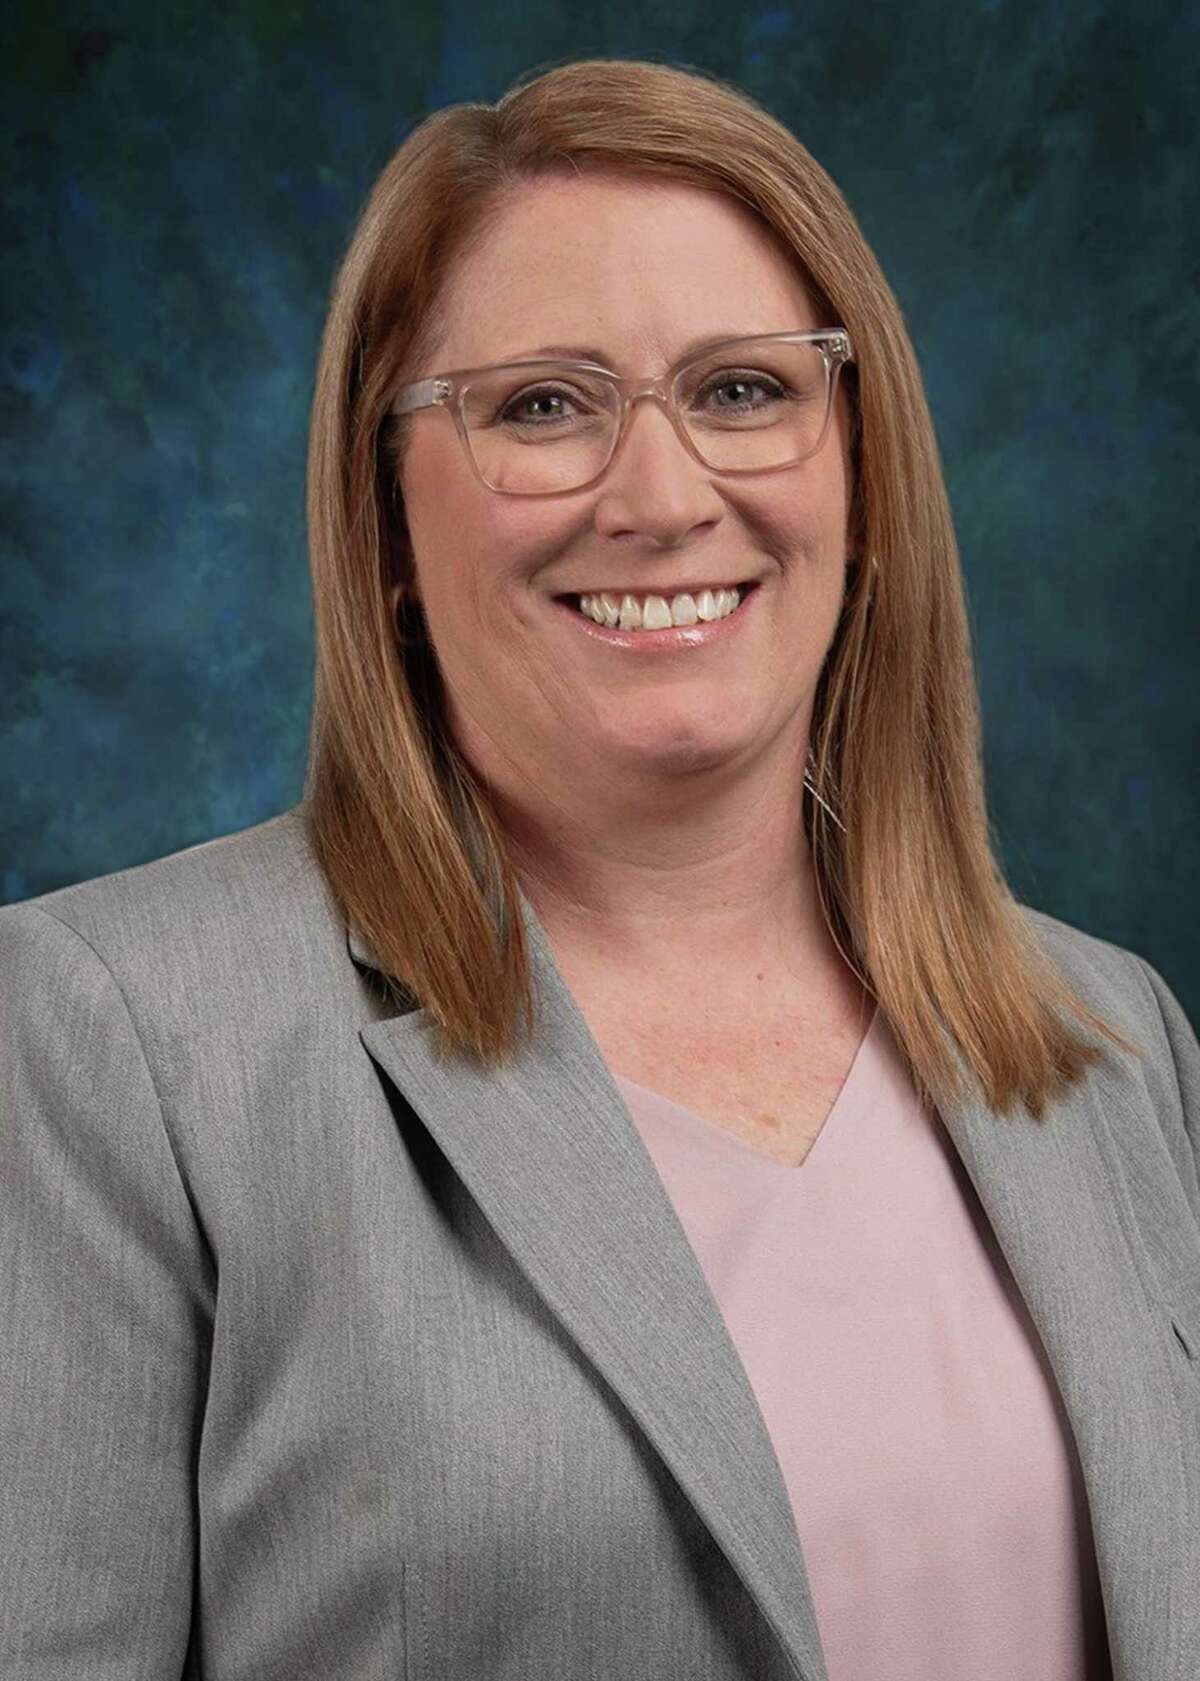 Amby Clinkscale, associate principal at Cypress Creek High School, was named the new principal at Arnold Middle School on April 28. Clinkscale replaces Jodi White, who will retire in June.